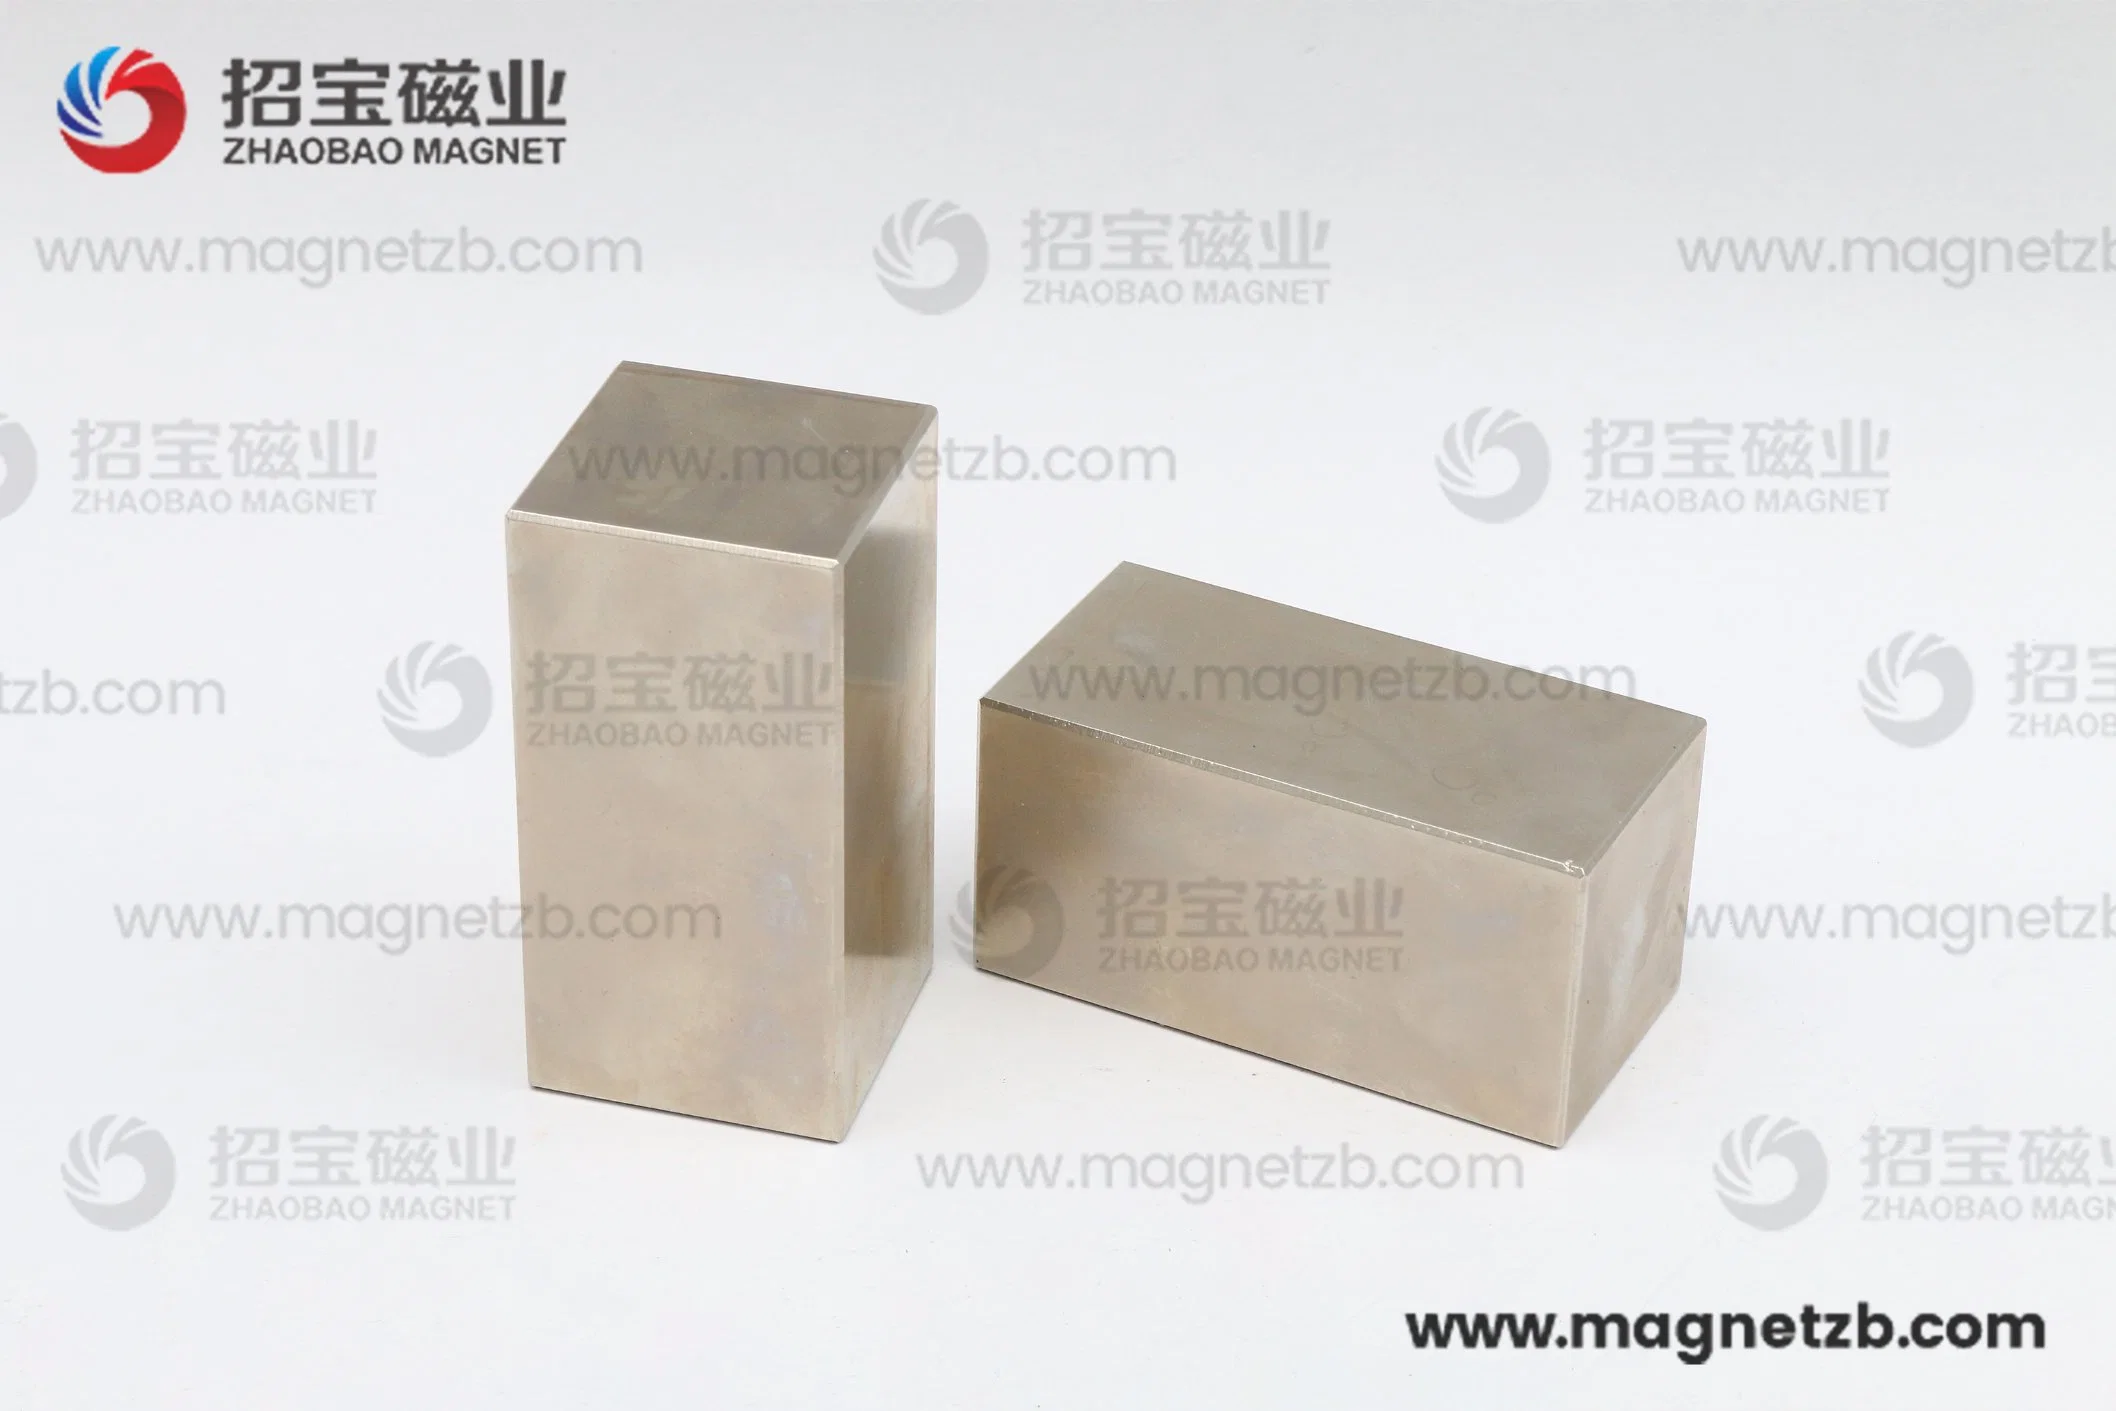 Permanent Strong Rare Earth Neodymium NdFeB Magnet Small Block Shape Magnet with Nickel Coating